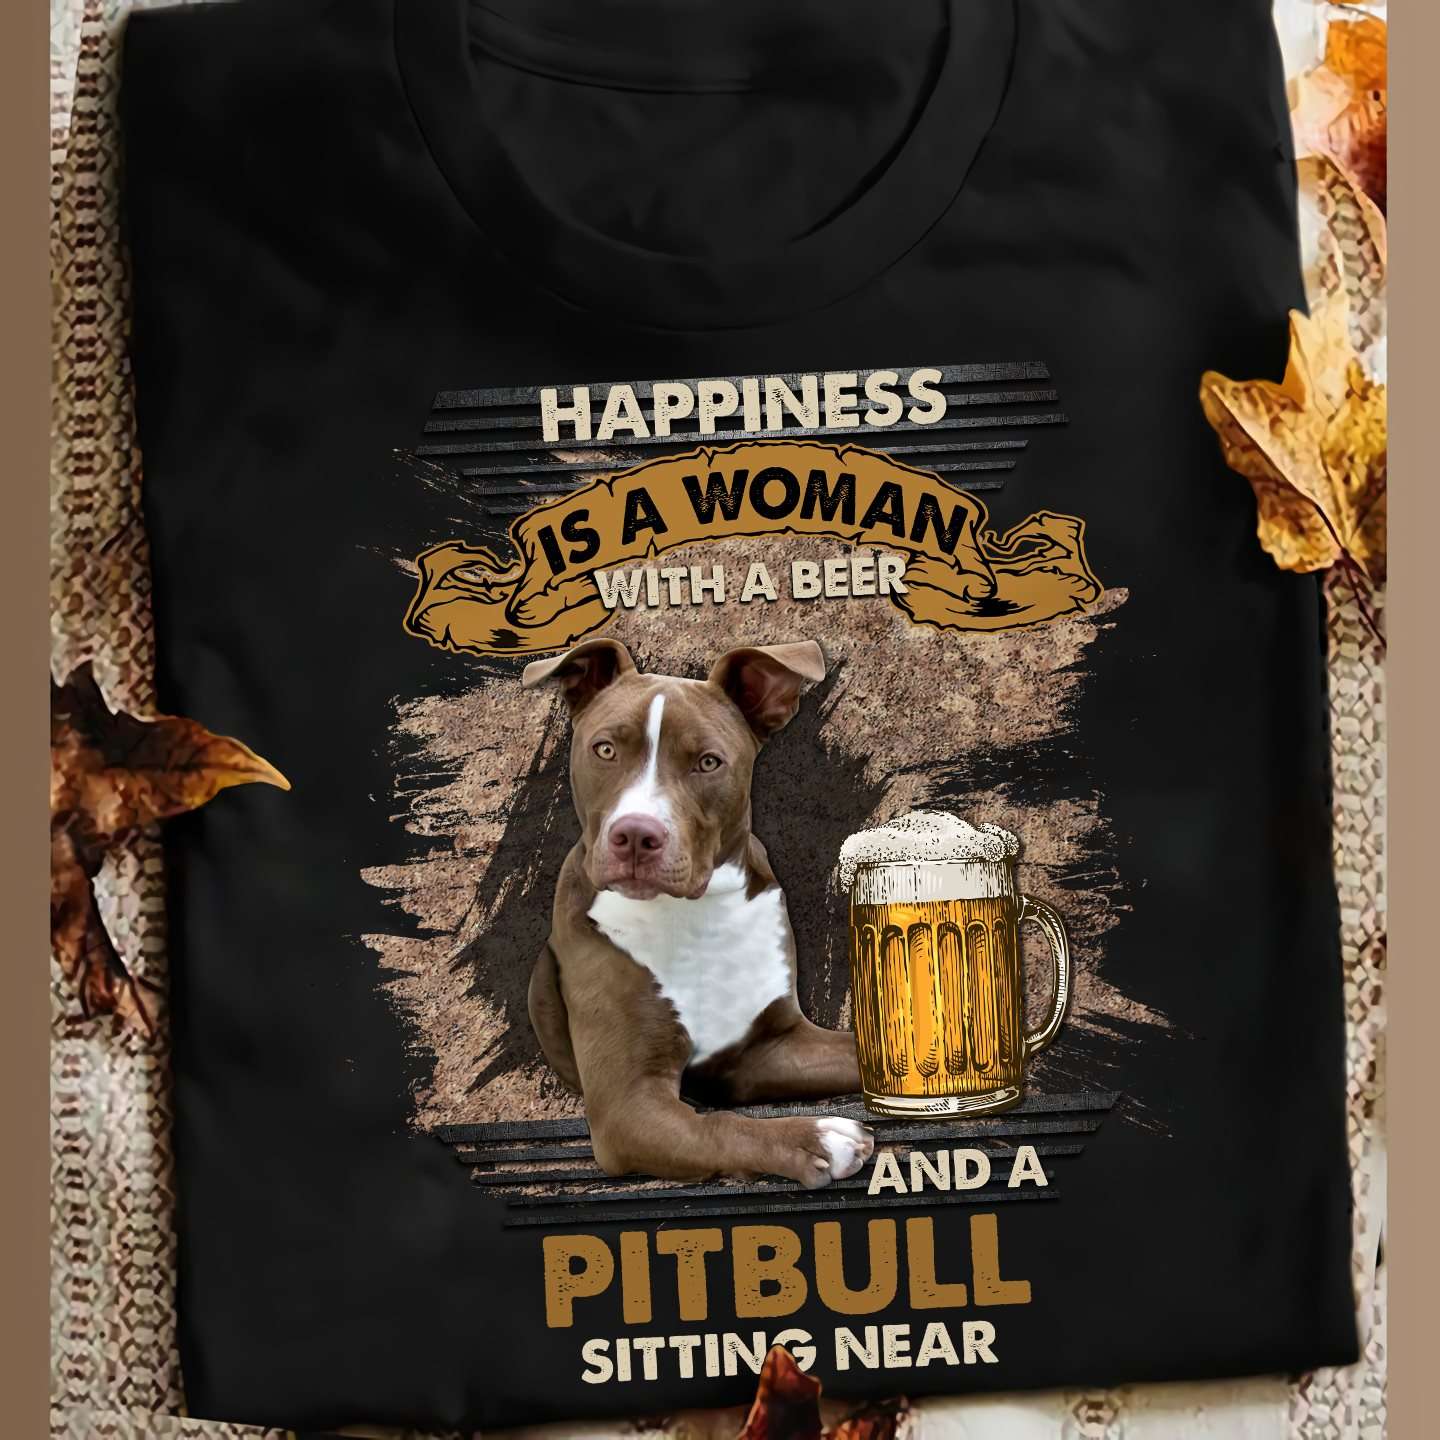 Pitbull Beer - Happiness is a woman with a beer and a pitbull sitting near